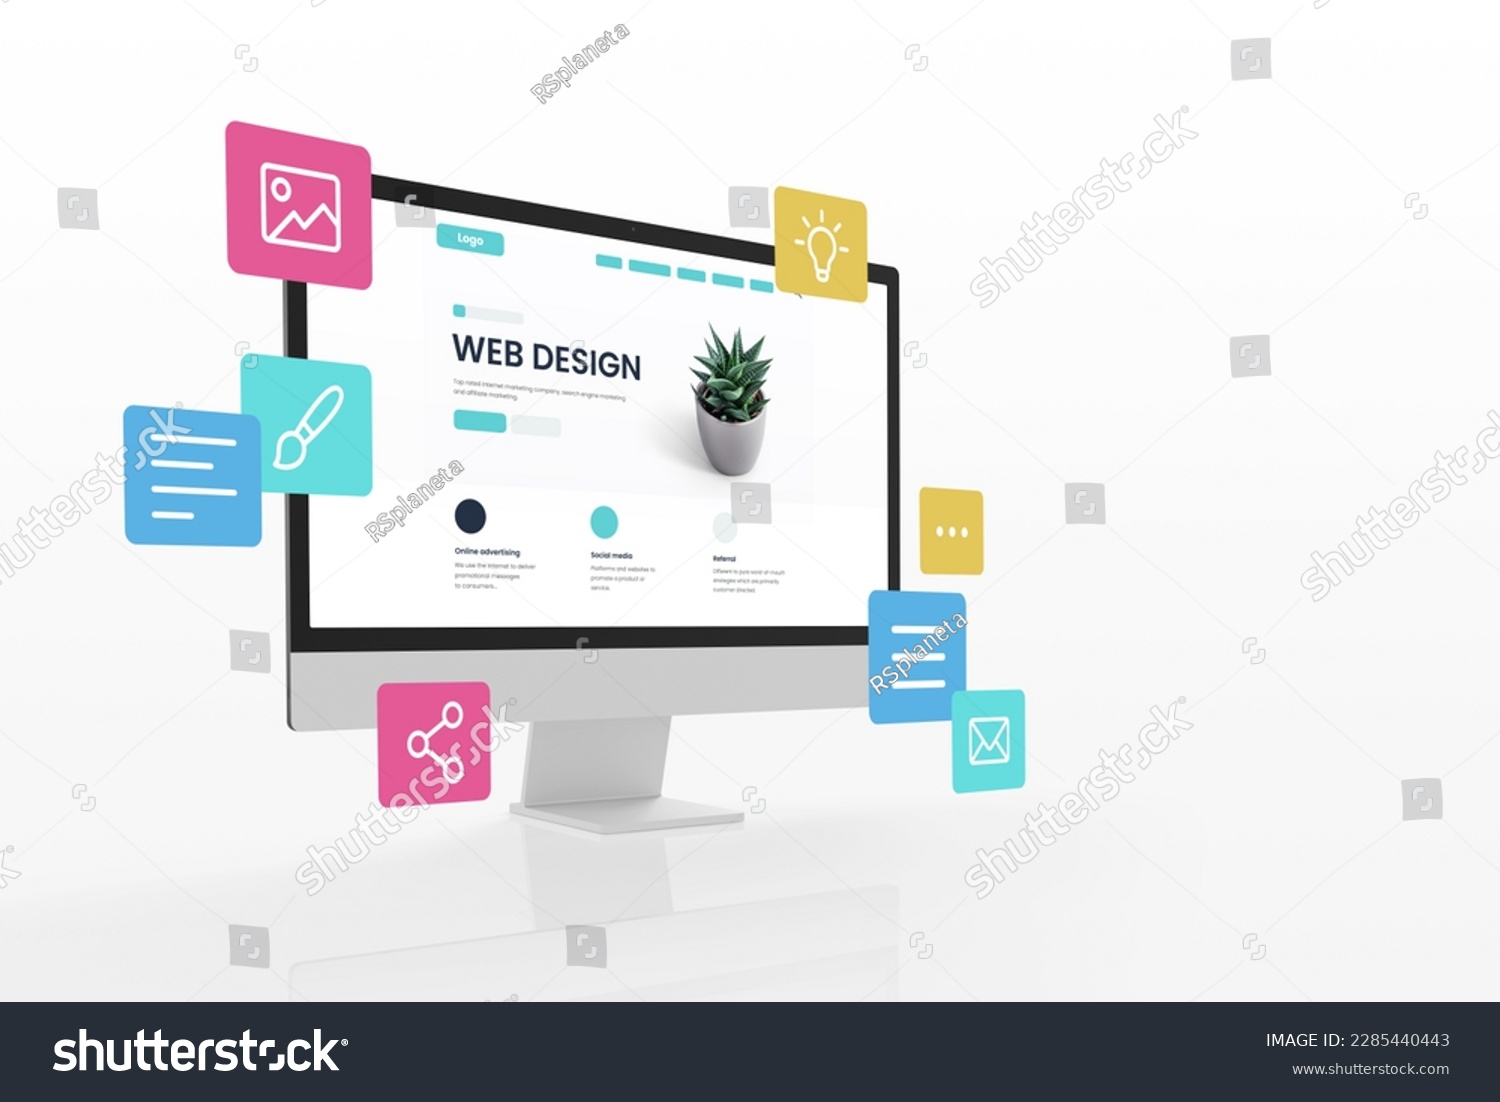 Concept of assembling a web page from modules that fly around the display. The web design studio concept page is on the display #2285440443